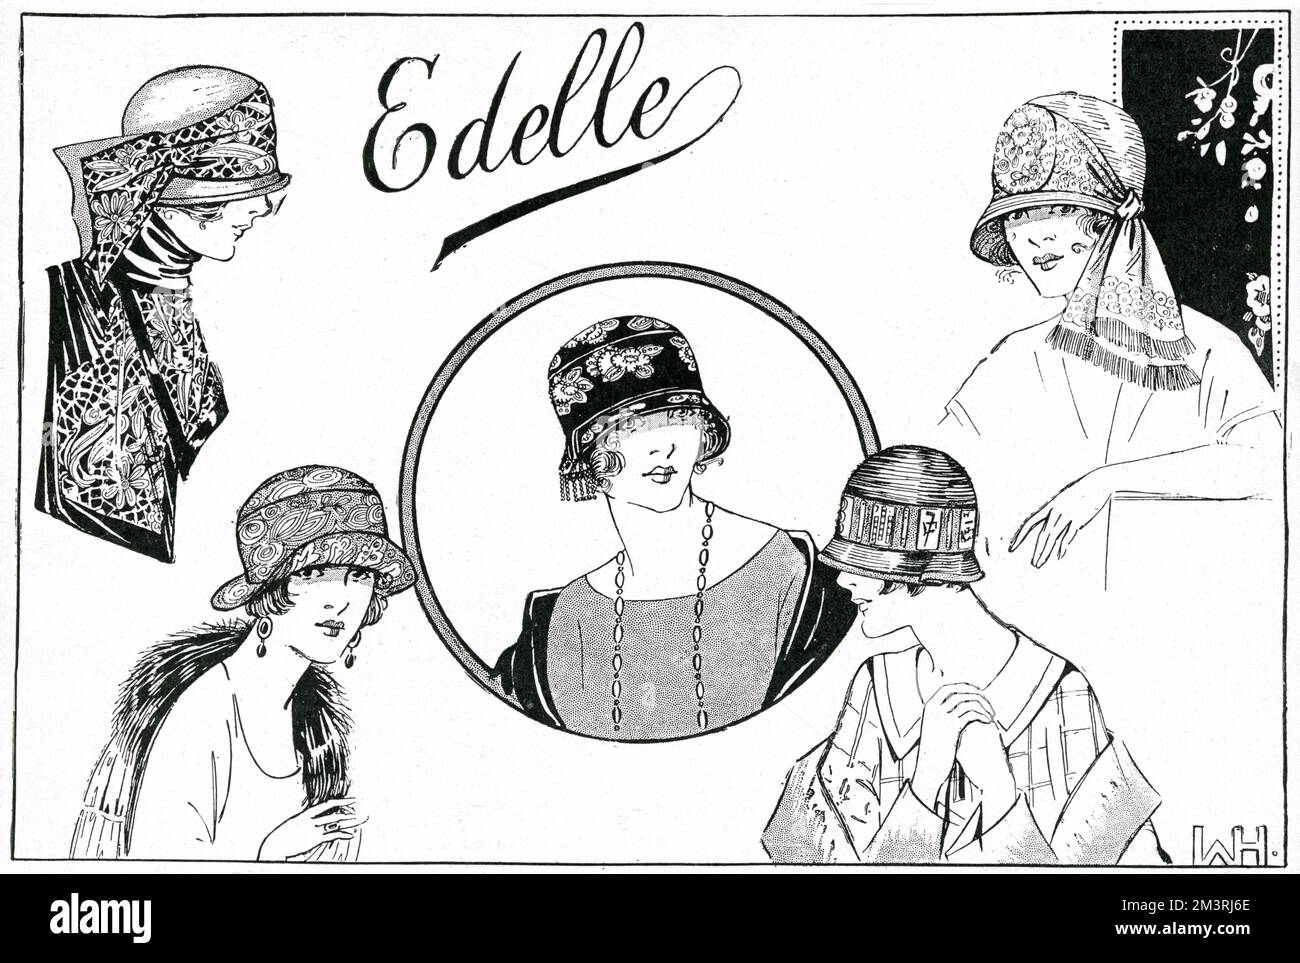 Five stylish women wearing the following outfits from Edelle, 30, New Bond Street: hat and scarf to match of crepe de chine embroidered in cardinal red (left top), embroidered crepe de chine hat (left bottom), taffeta appliqued with flowers and leaves and beads (center), hat of fine straw embroidered with Mah Jongg symbols on a wide ribbon encircling the crown (right bottom) and hat with white chine beads - a medallion in front with chintz flowers decoration (right top)     Date: 1924 Stock Photo